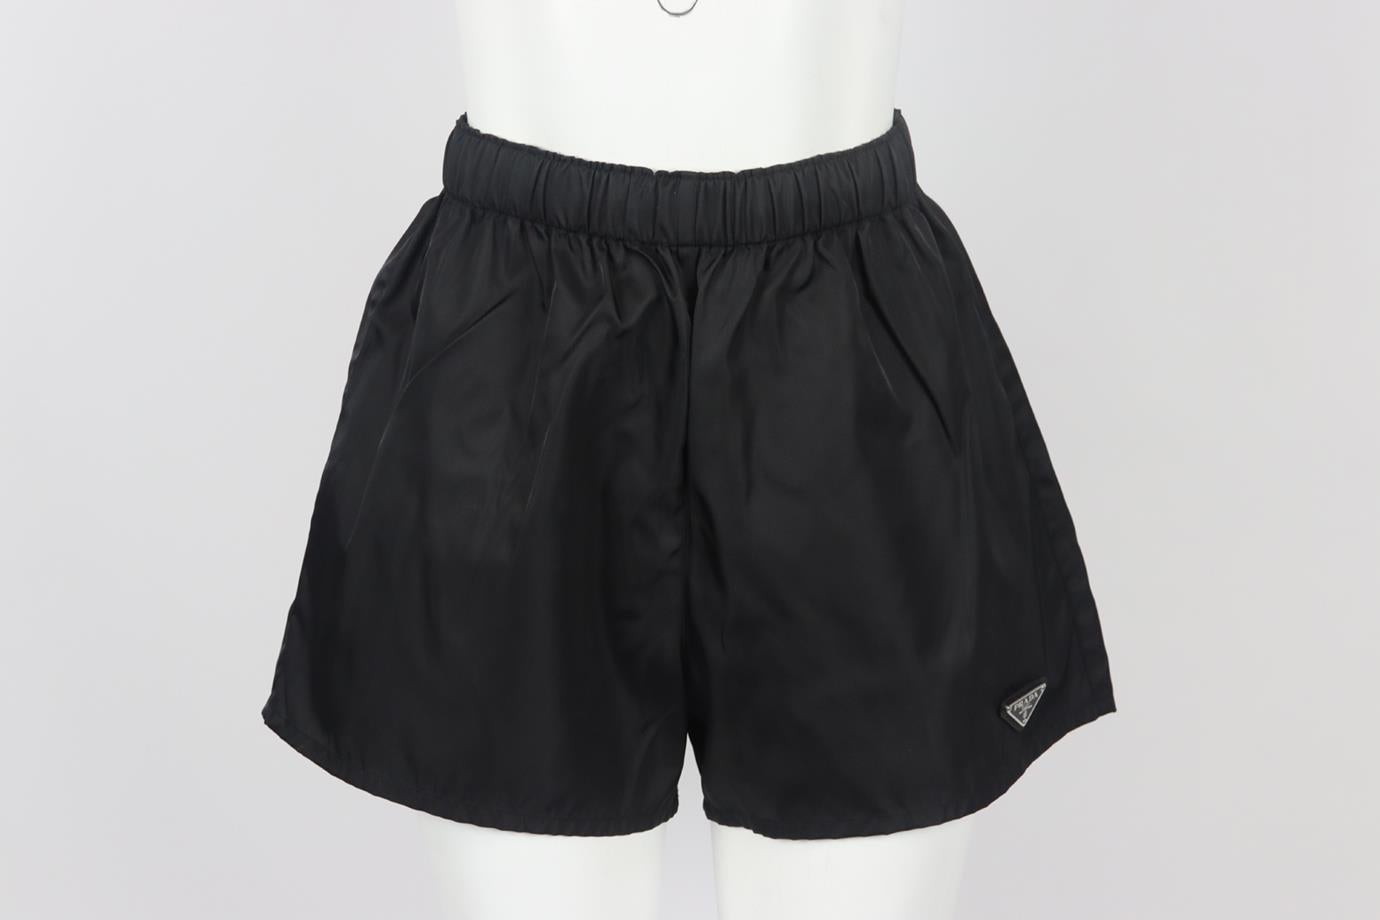 Prada logo appliquéd shell shorts. Black. Pull on. 100% polyamide. Size: IT 42 (UK 10, FR 38, US 6). Waist: 25.5 in. Hips: 41.8 in. Length: 15.7 in. Inseam: 3 in. Rise: 14 in. Very good condition - Some small marks; see pictures.